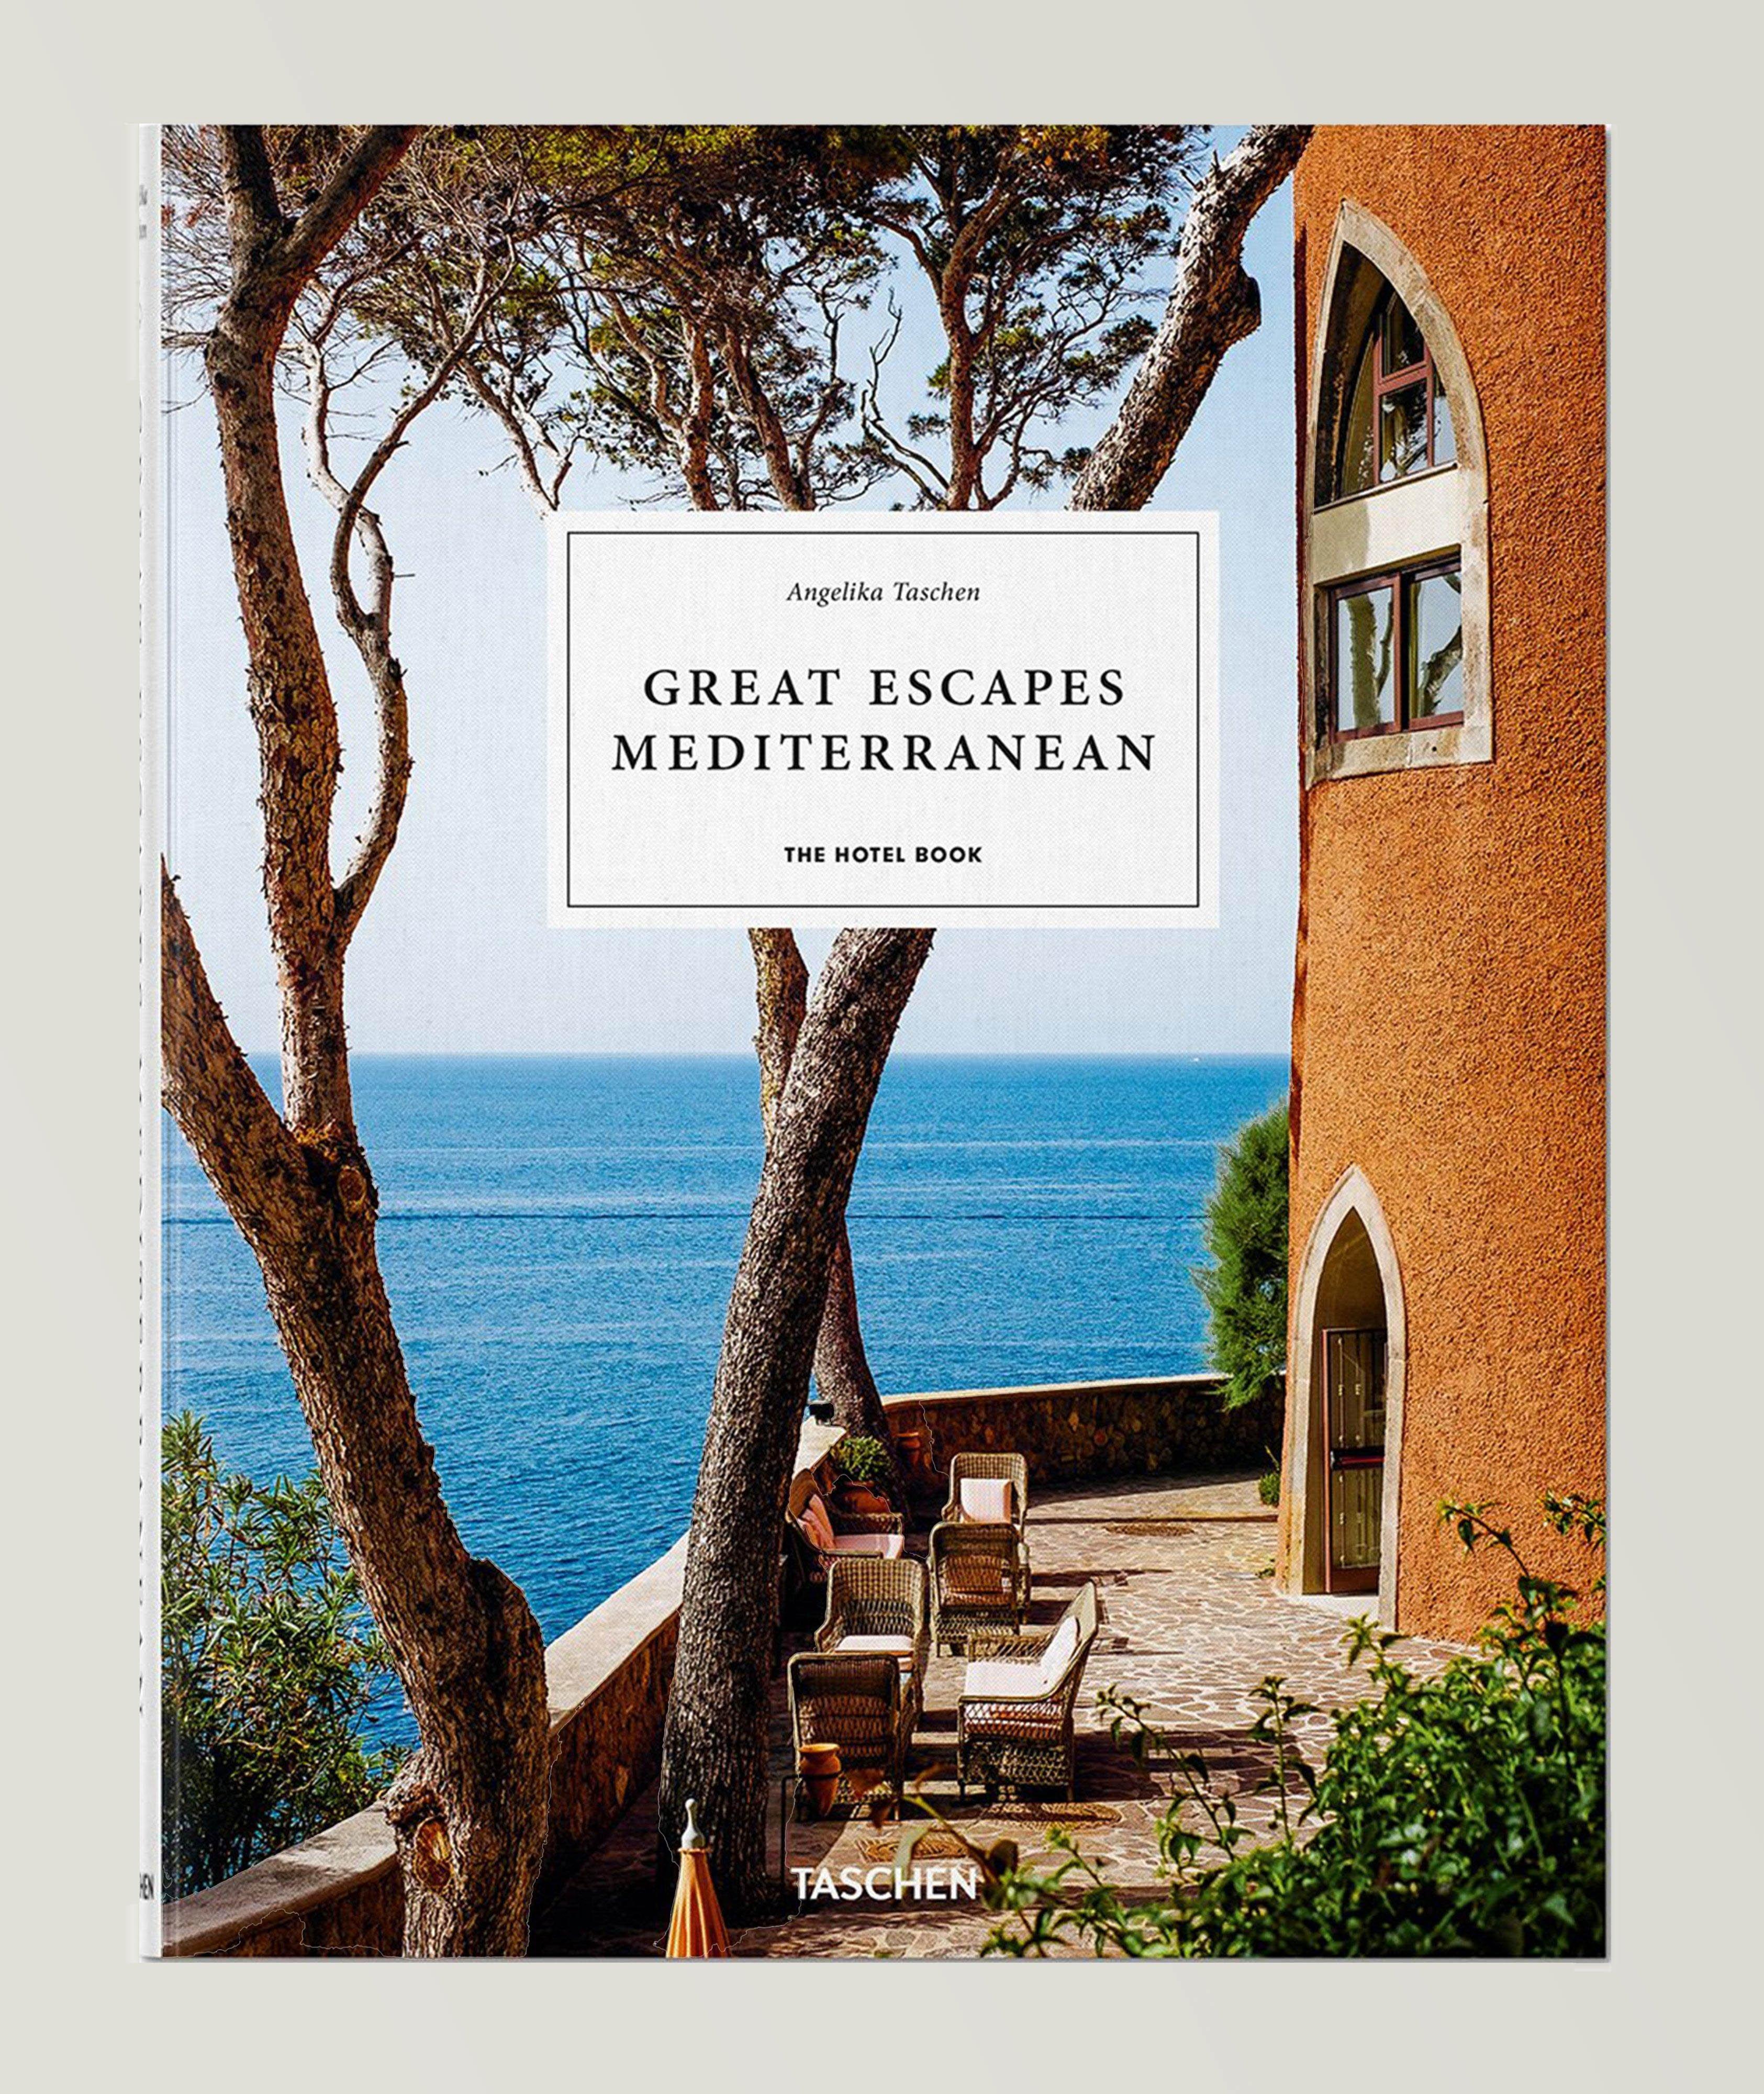 Great Escapes Mediterranean. The Hotel Book image 0